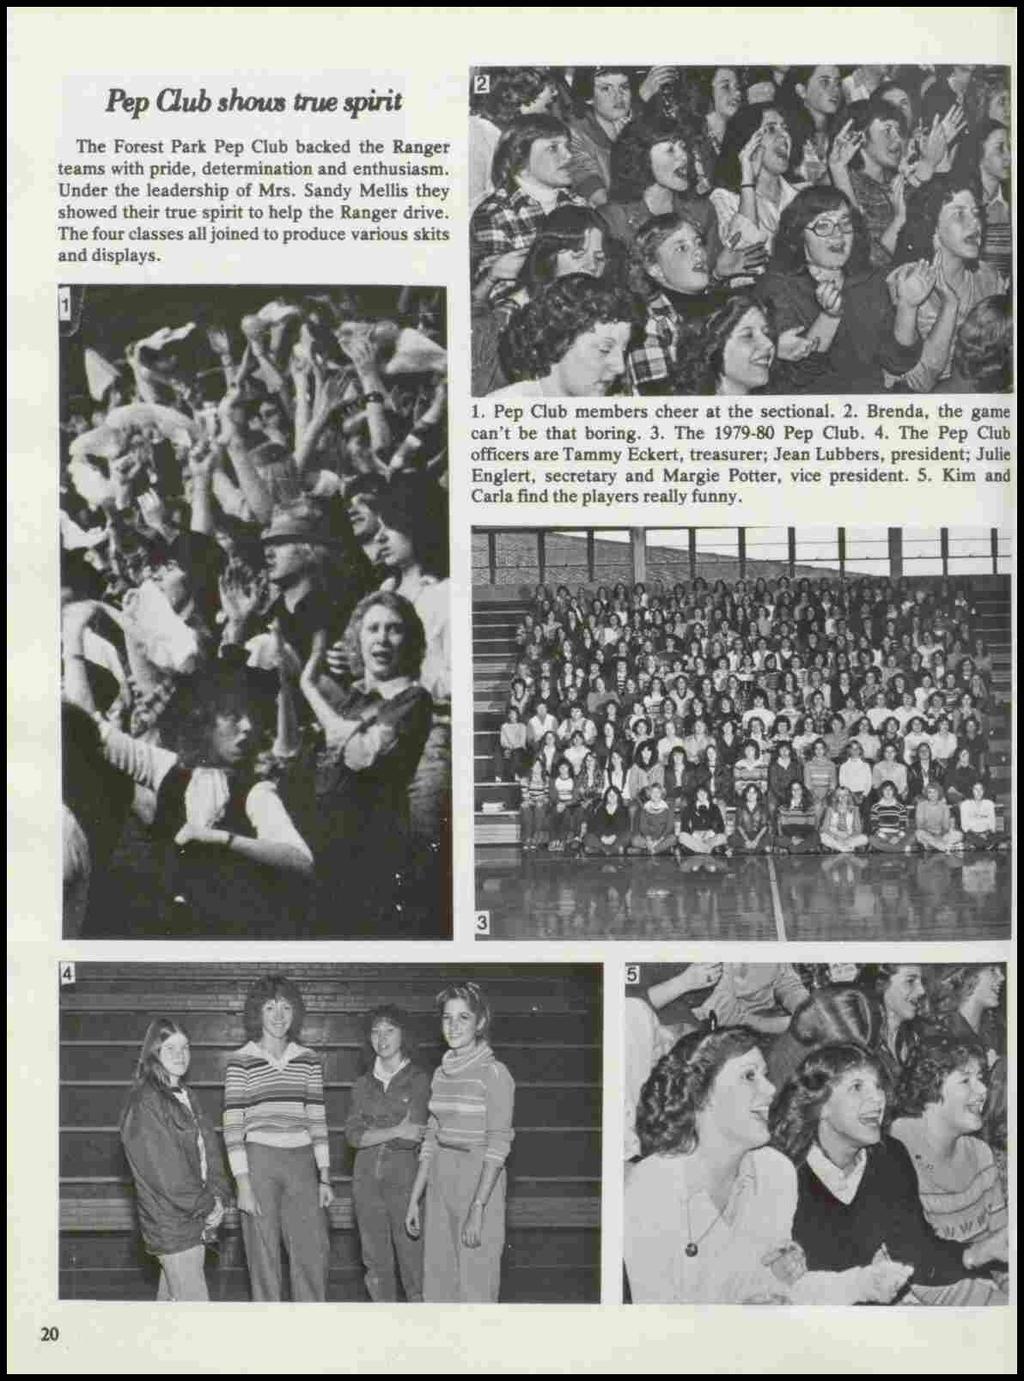 Pep llub &howt true 3piril The Forest Park Pep Club backed the Ranger teams with pride, determination and enthusiasm. Under the leadership of Mrs.